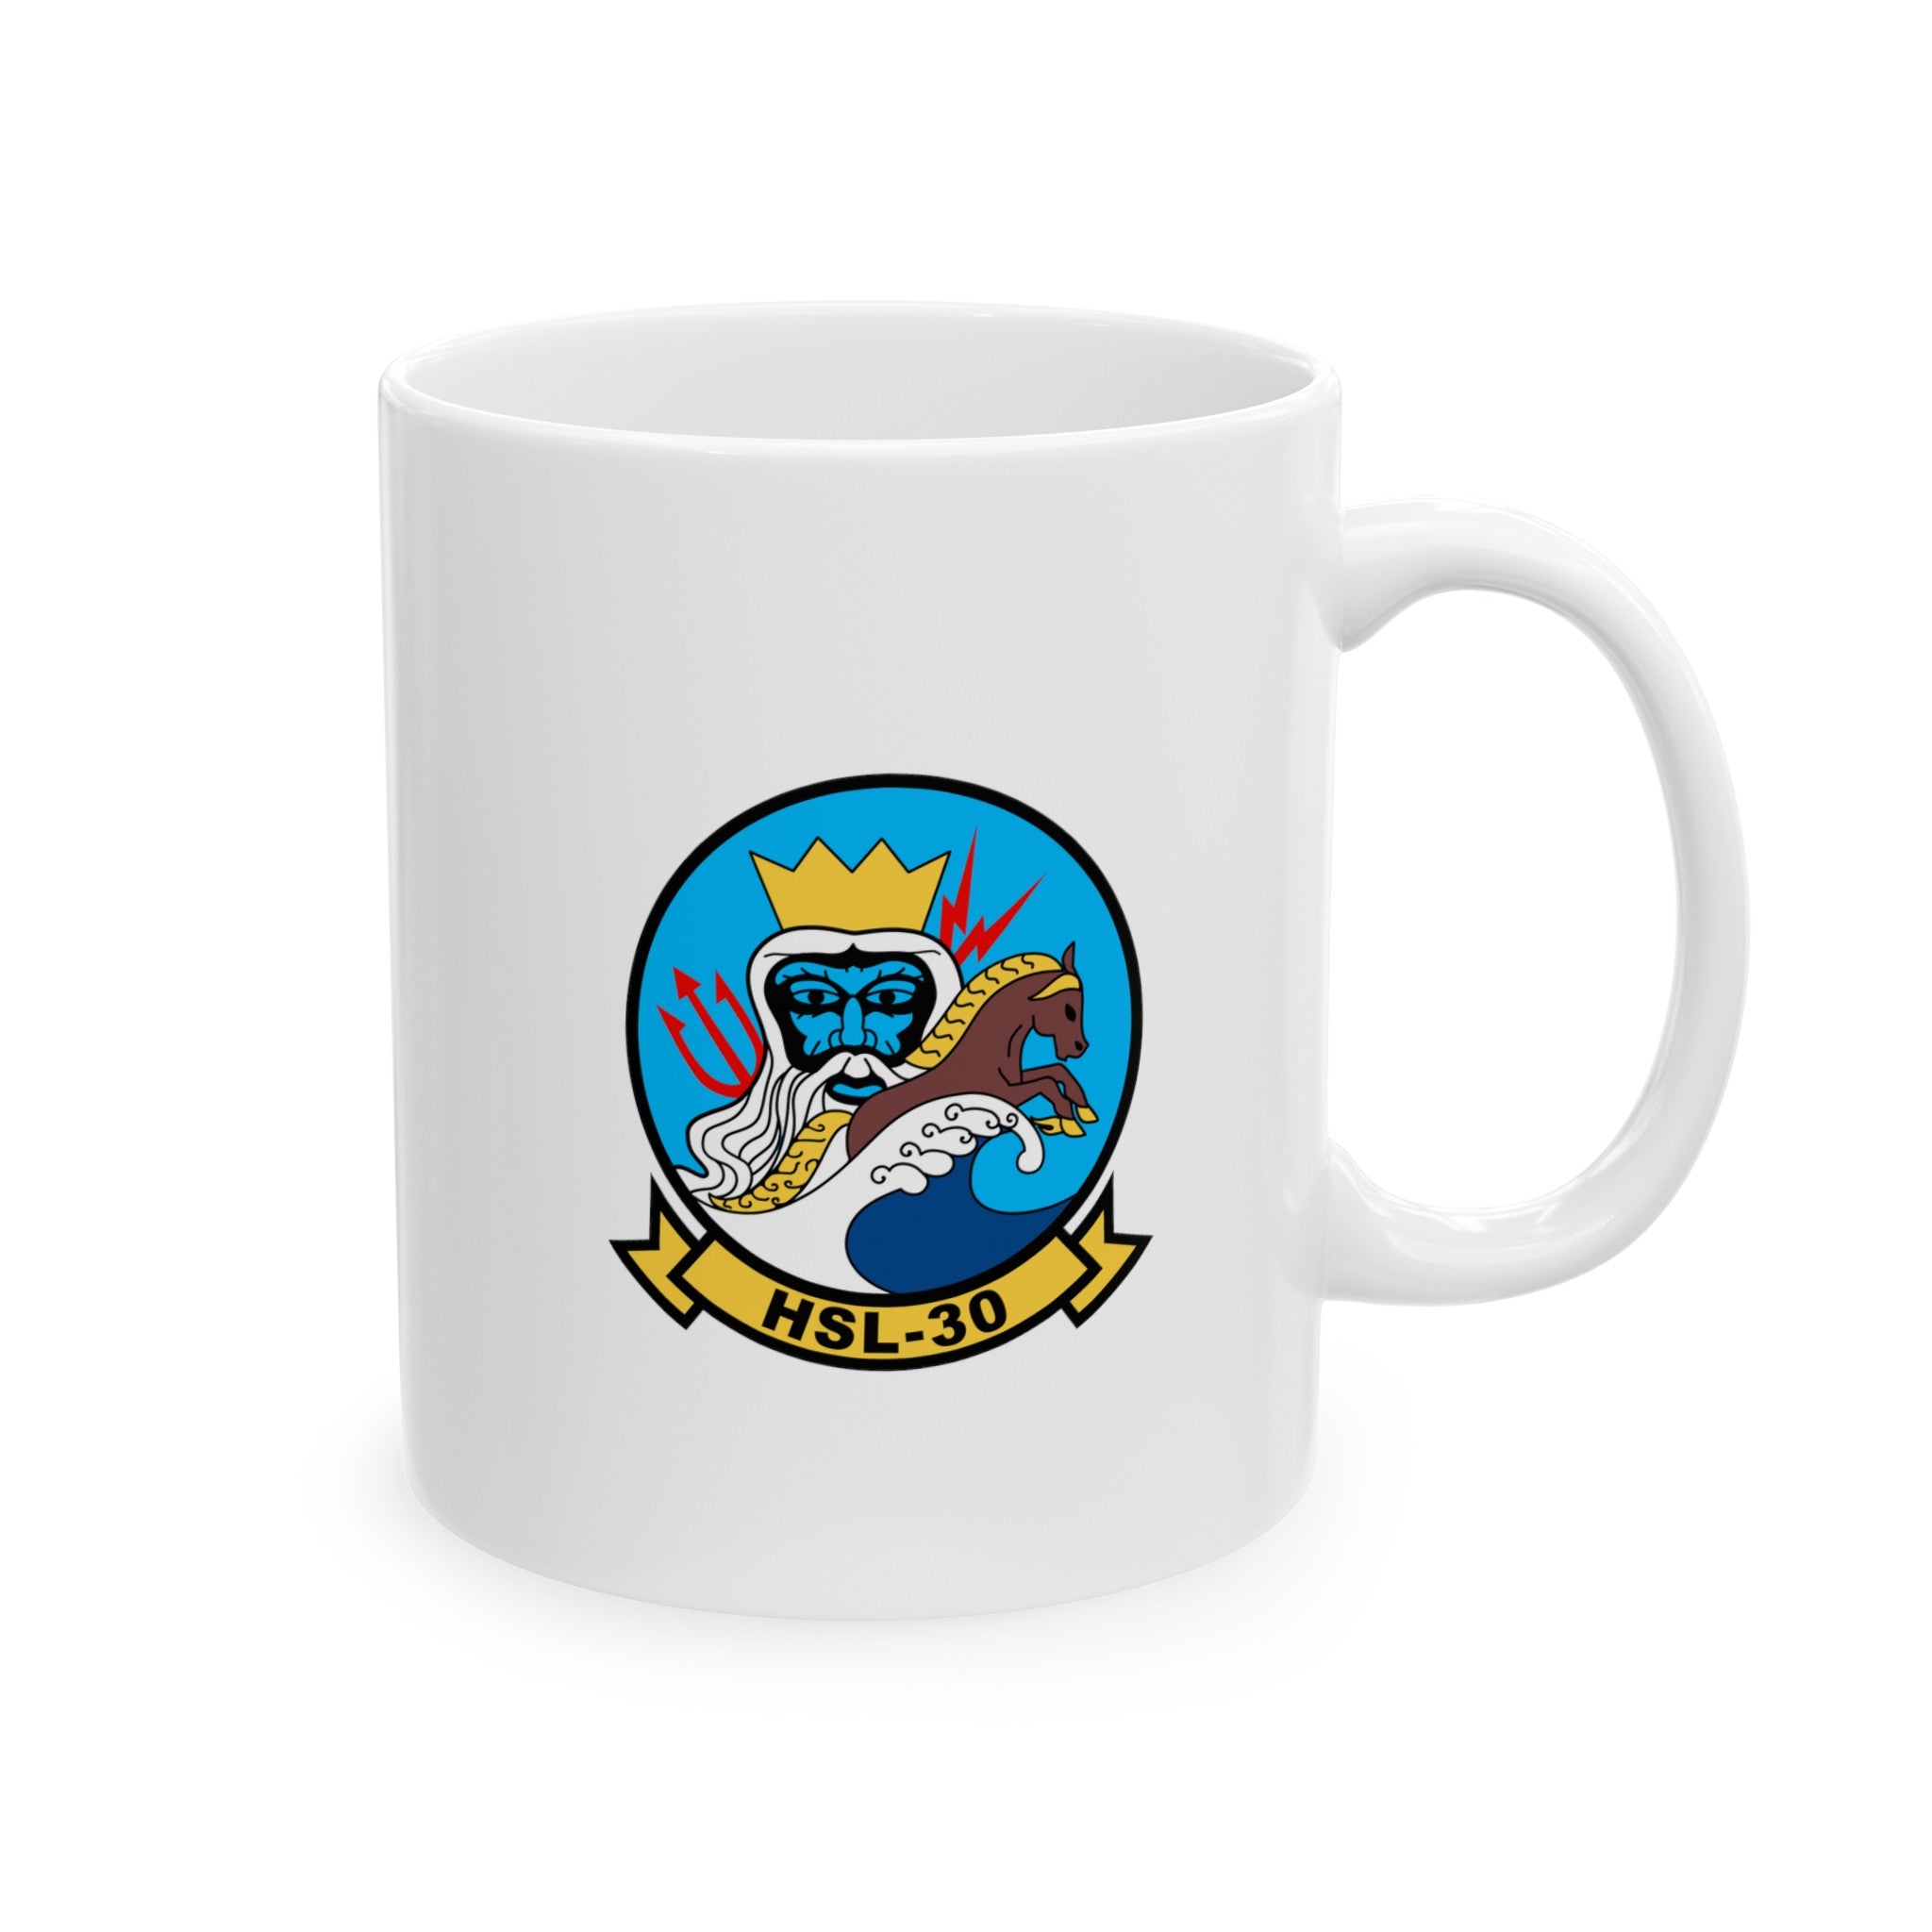 HSL-34 "Neptune's Horsemen" Squadron Logo and SH-2 Profile Coffee Mug, Navy Helicopter ASW Squadron Light flying the SH-2 Seasprite